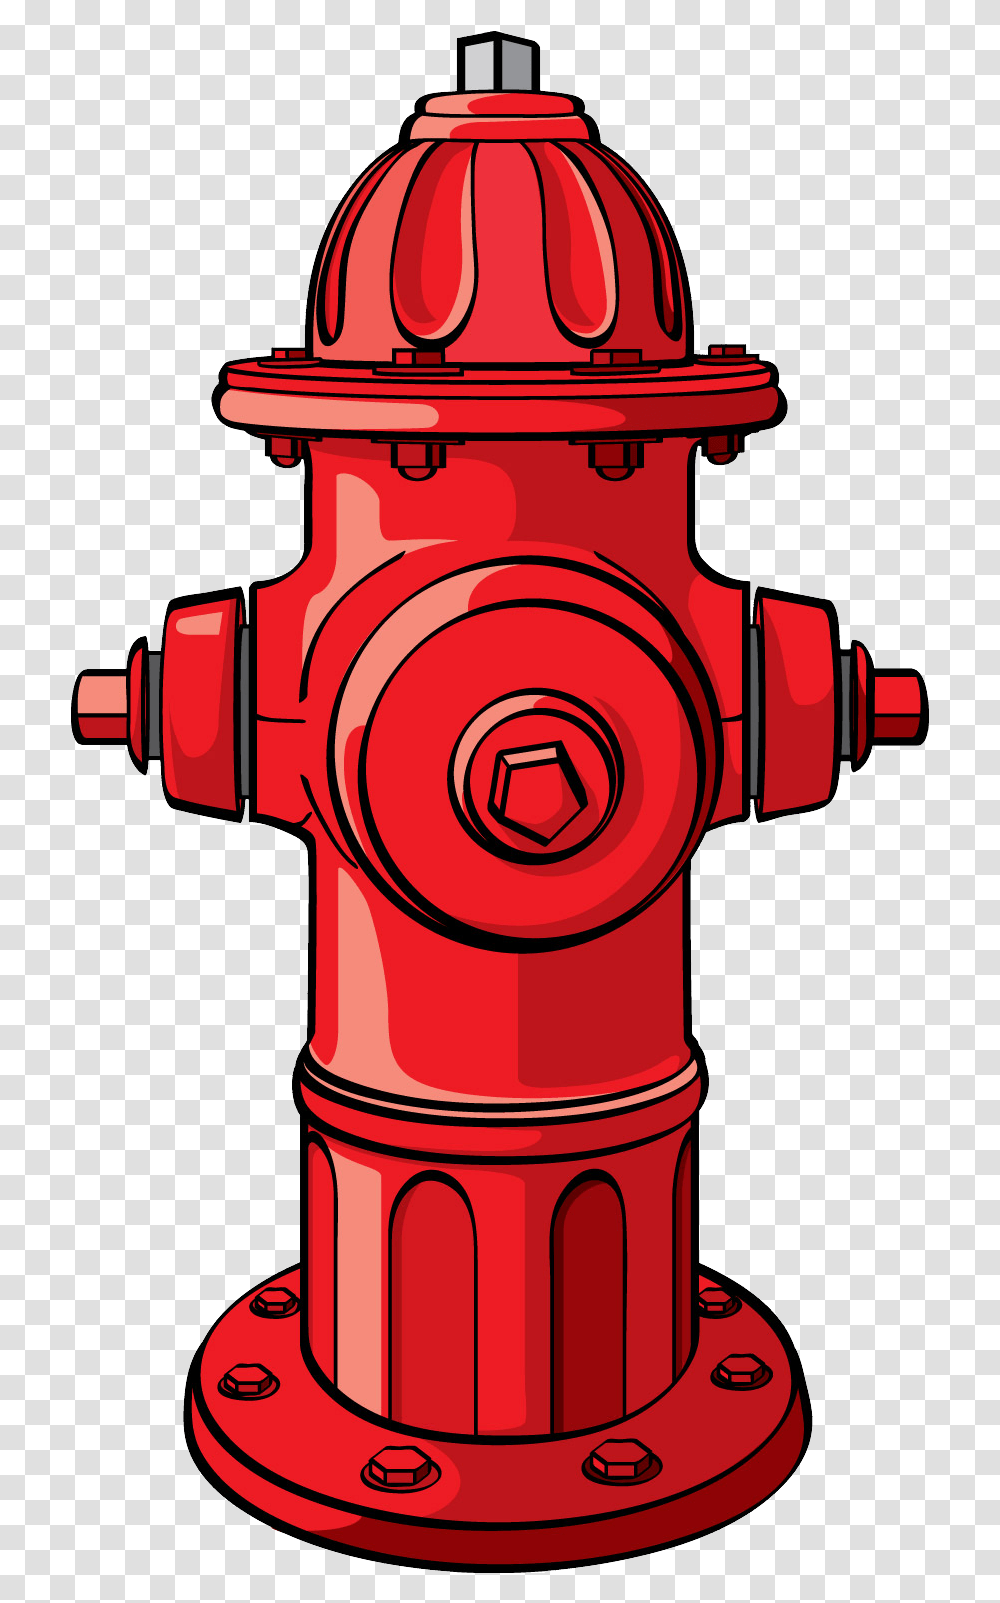 Download Fire Hydrant Image For Free Fire Hydrant Clipart Transparent Png